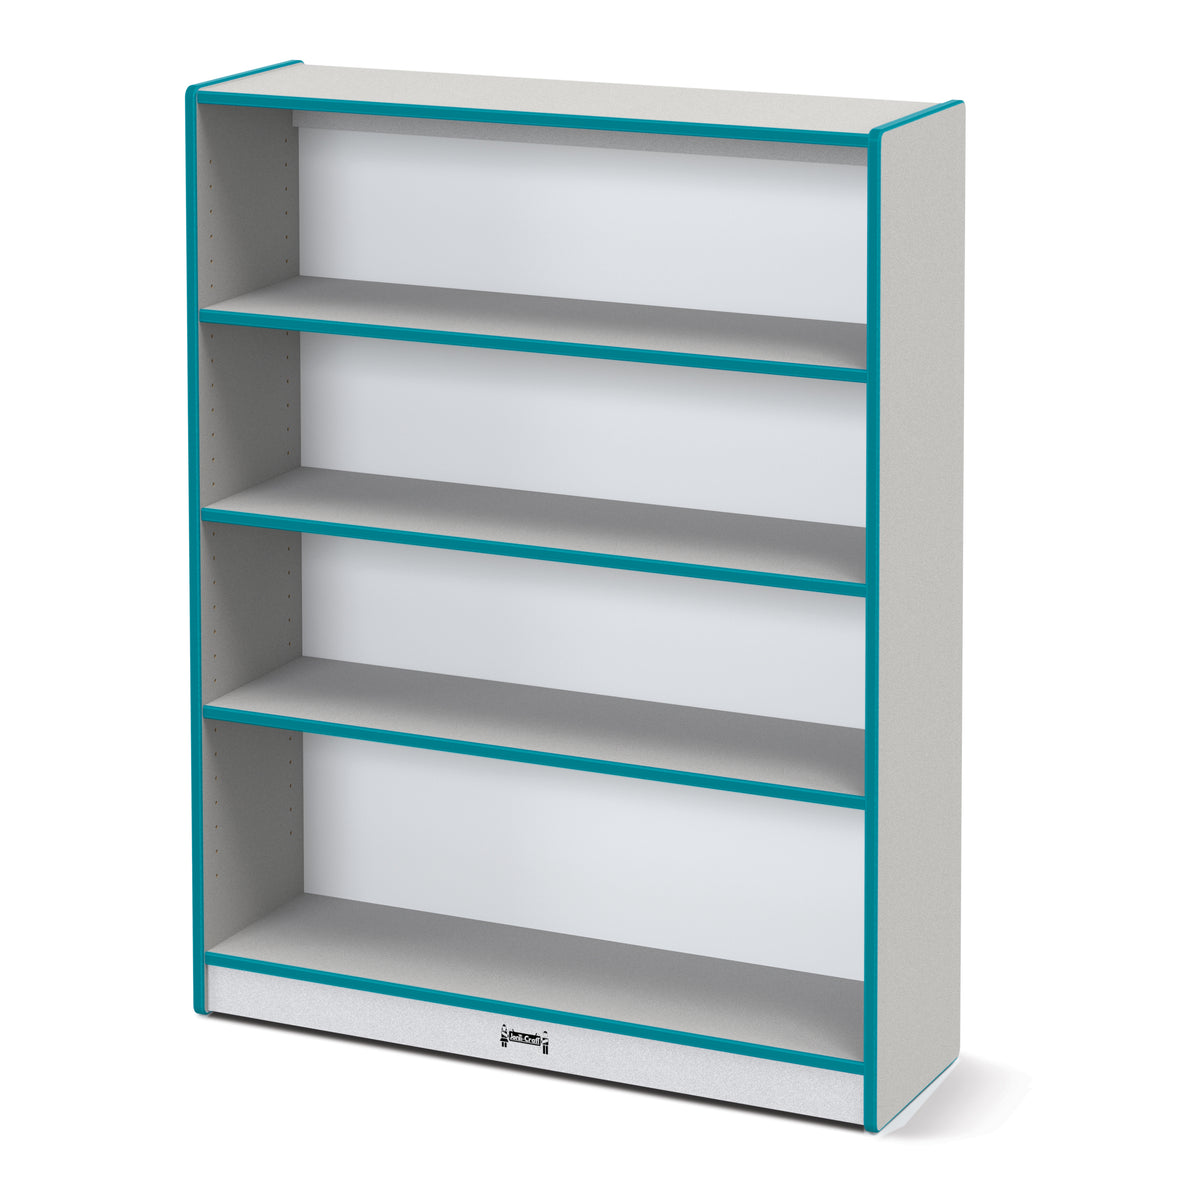 0971JC005, Rainbow Accents Standard Bookcase - Teal